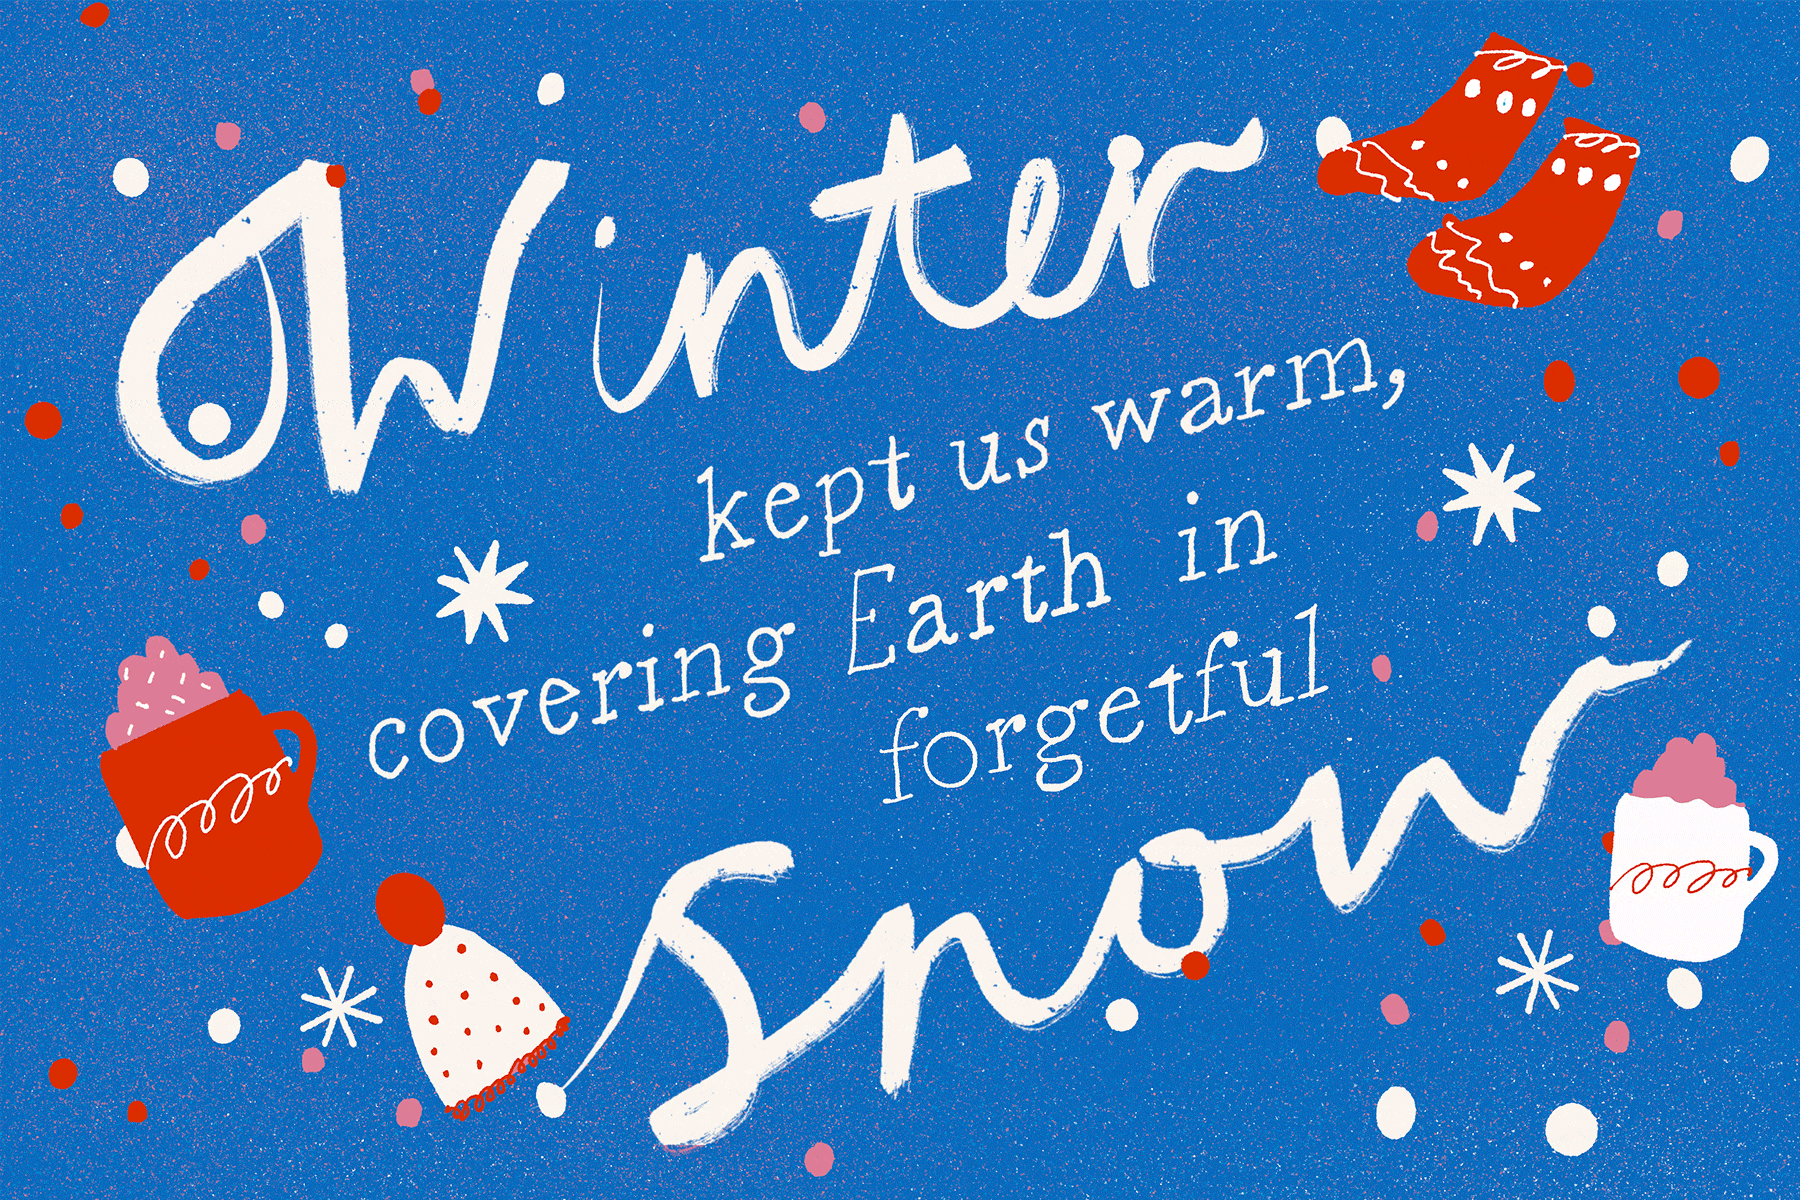 A gif of the words 'Winter kept us warm, covering us in forgetful snow'